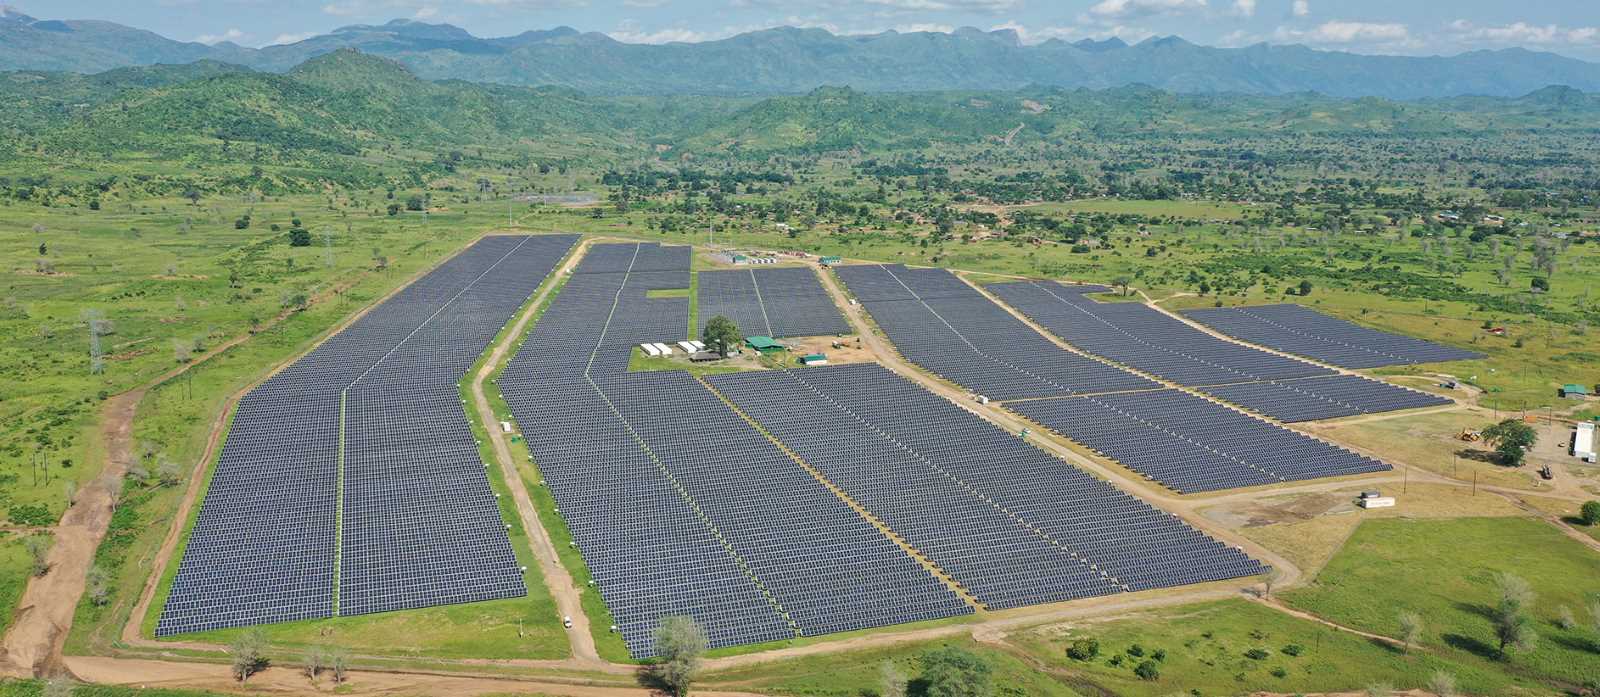 Golomoti is the first commercially operated solar-power plant in Malawi. It is a public-private partnership between Canadian independent power producer JCM Power, investment company InfraCo Africa, the Malawian government and the state-owned Electricity Supply Corporation of Malawi.